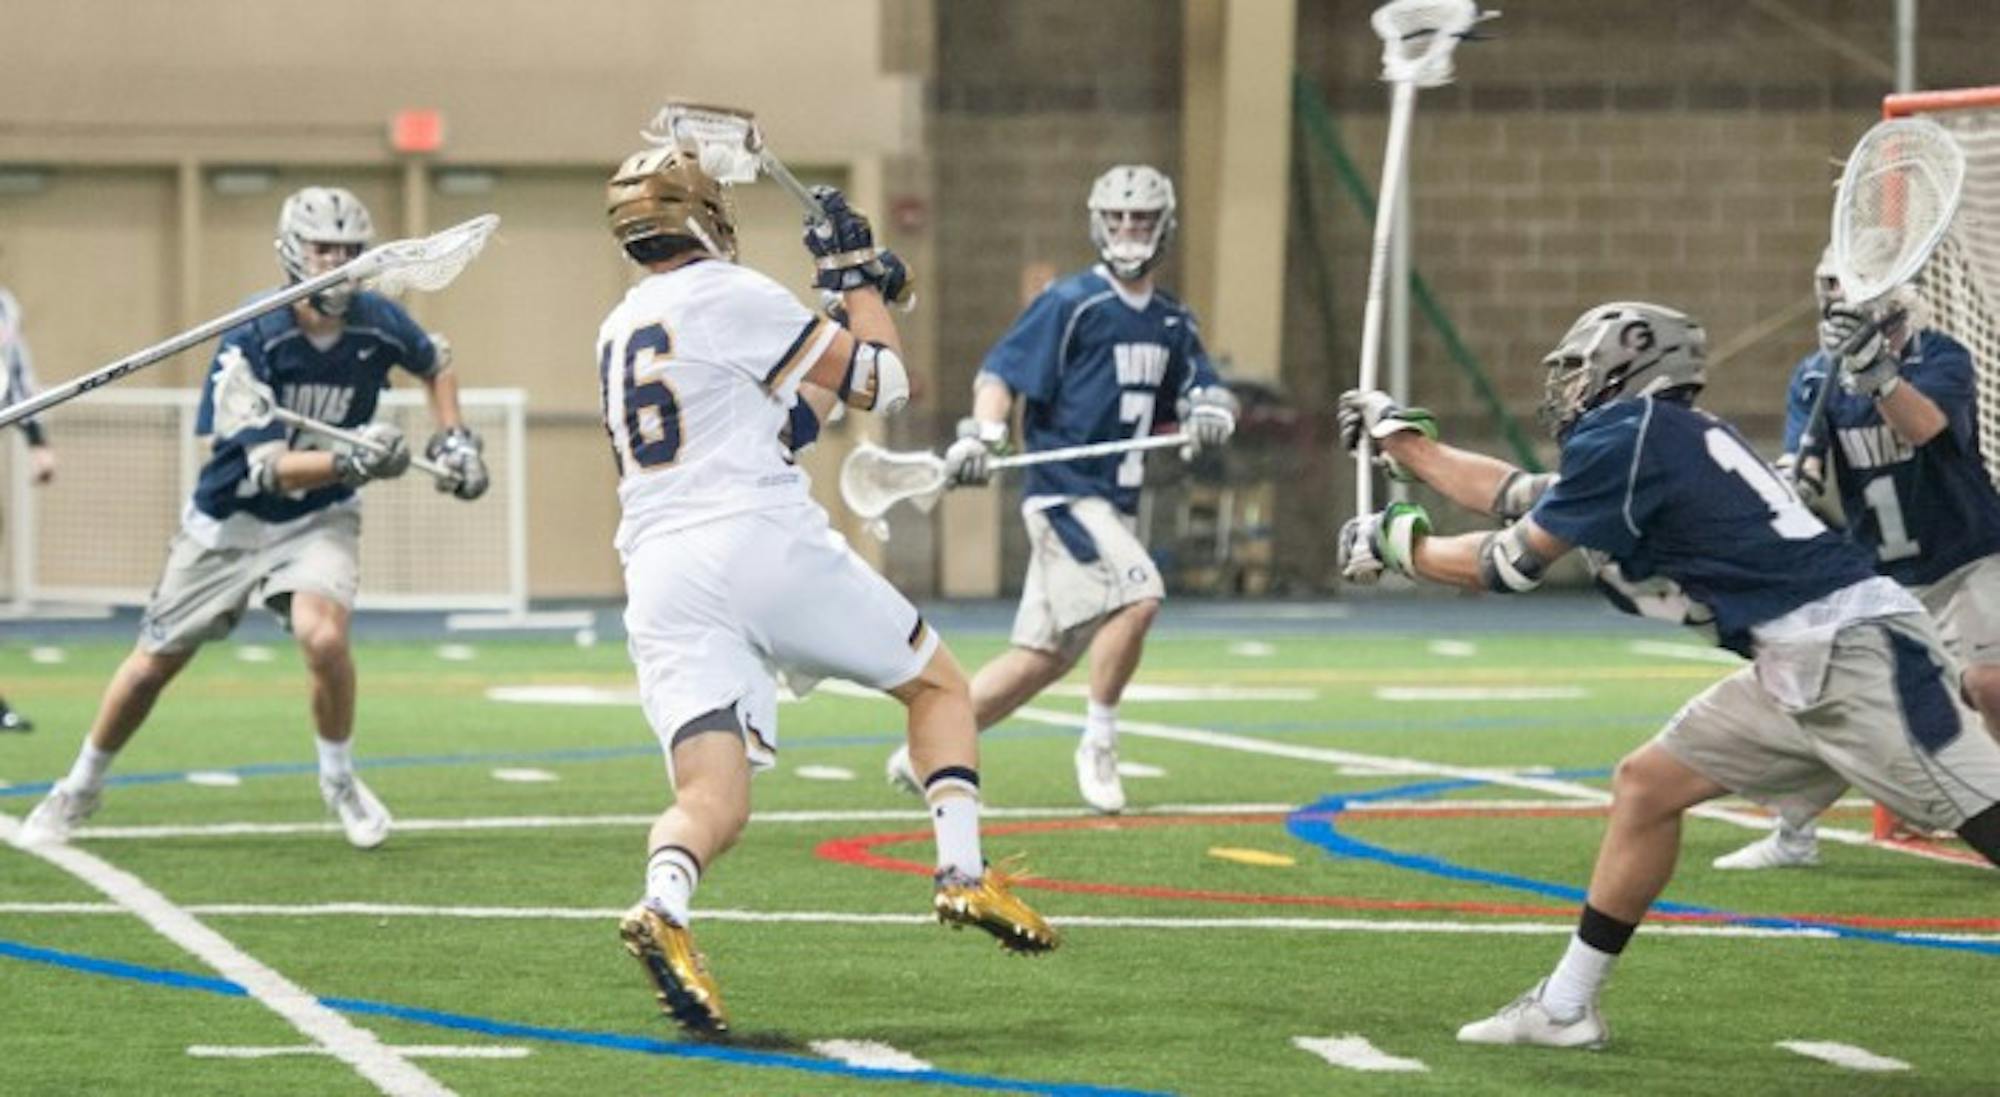 Irish senior midfielder Sergio Perkovic lines up a shot he scored on during Notre Dame’s 14-12 win over Georgetown on Feb. 14.